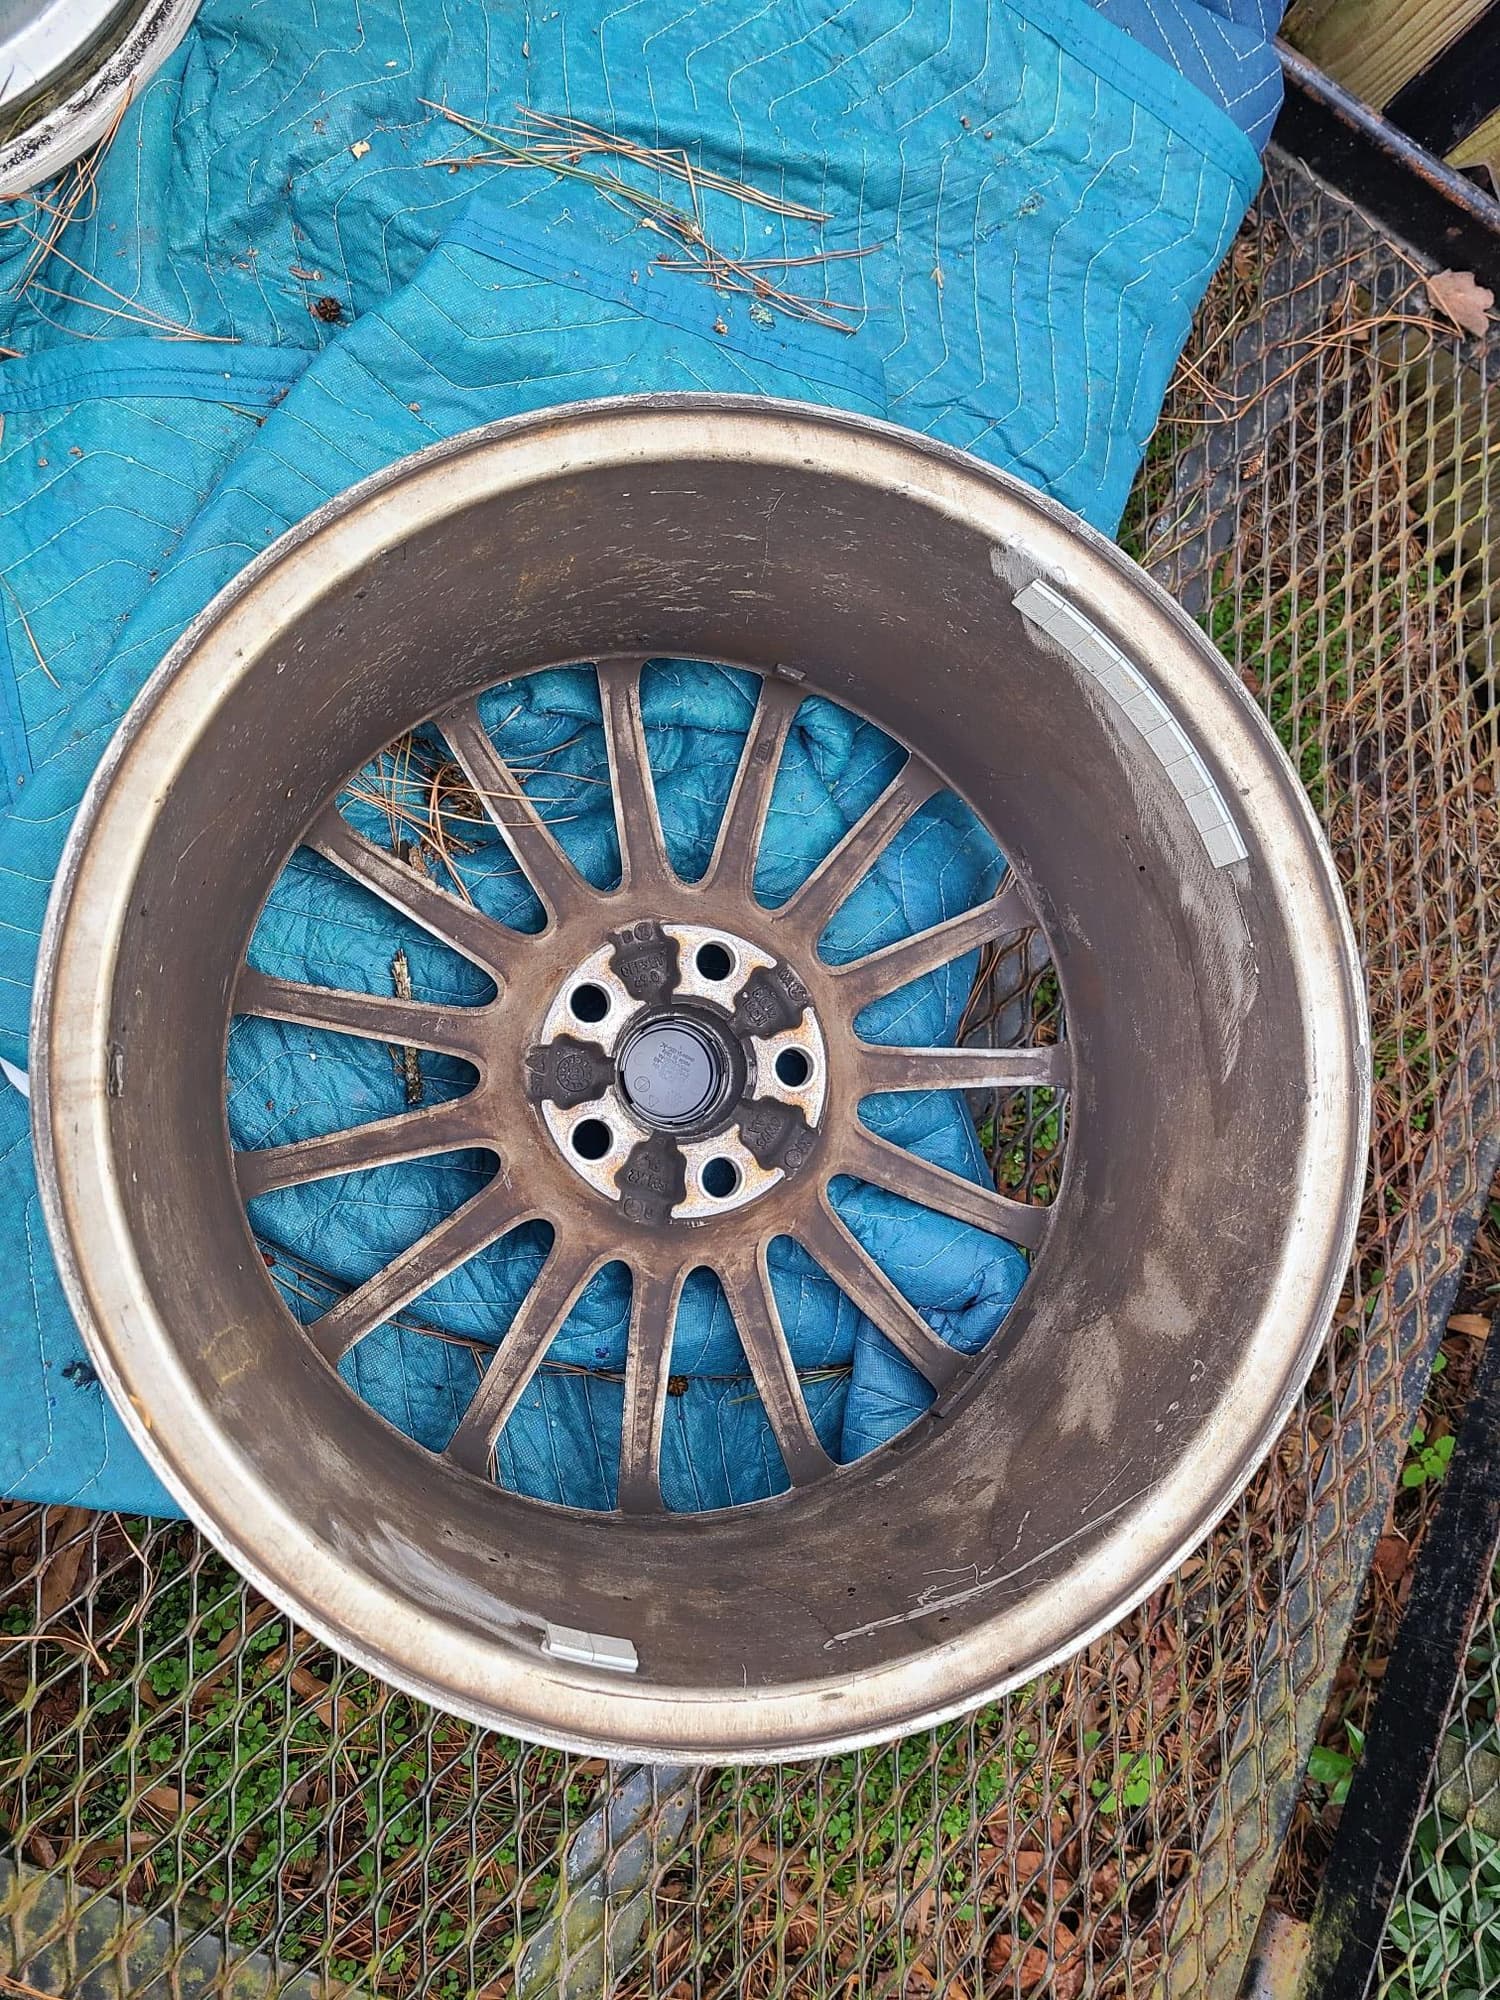 Wheels and Tires/Axles - Set of five 18" Wheels - Used - 0  All Models - Chesapeake, VA 23322, United States